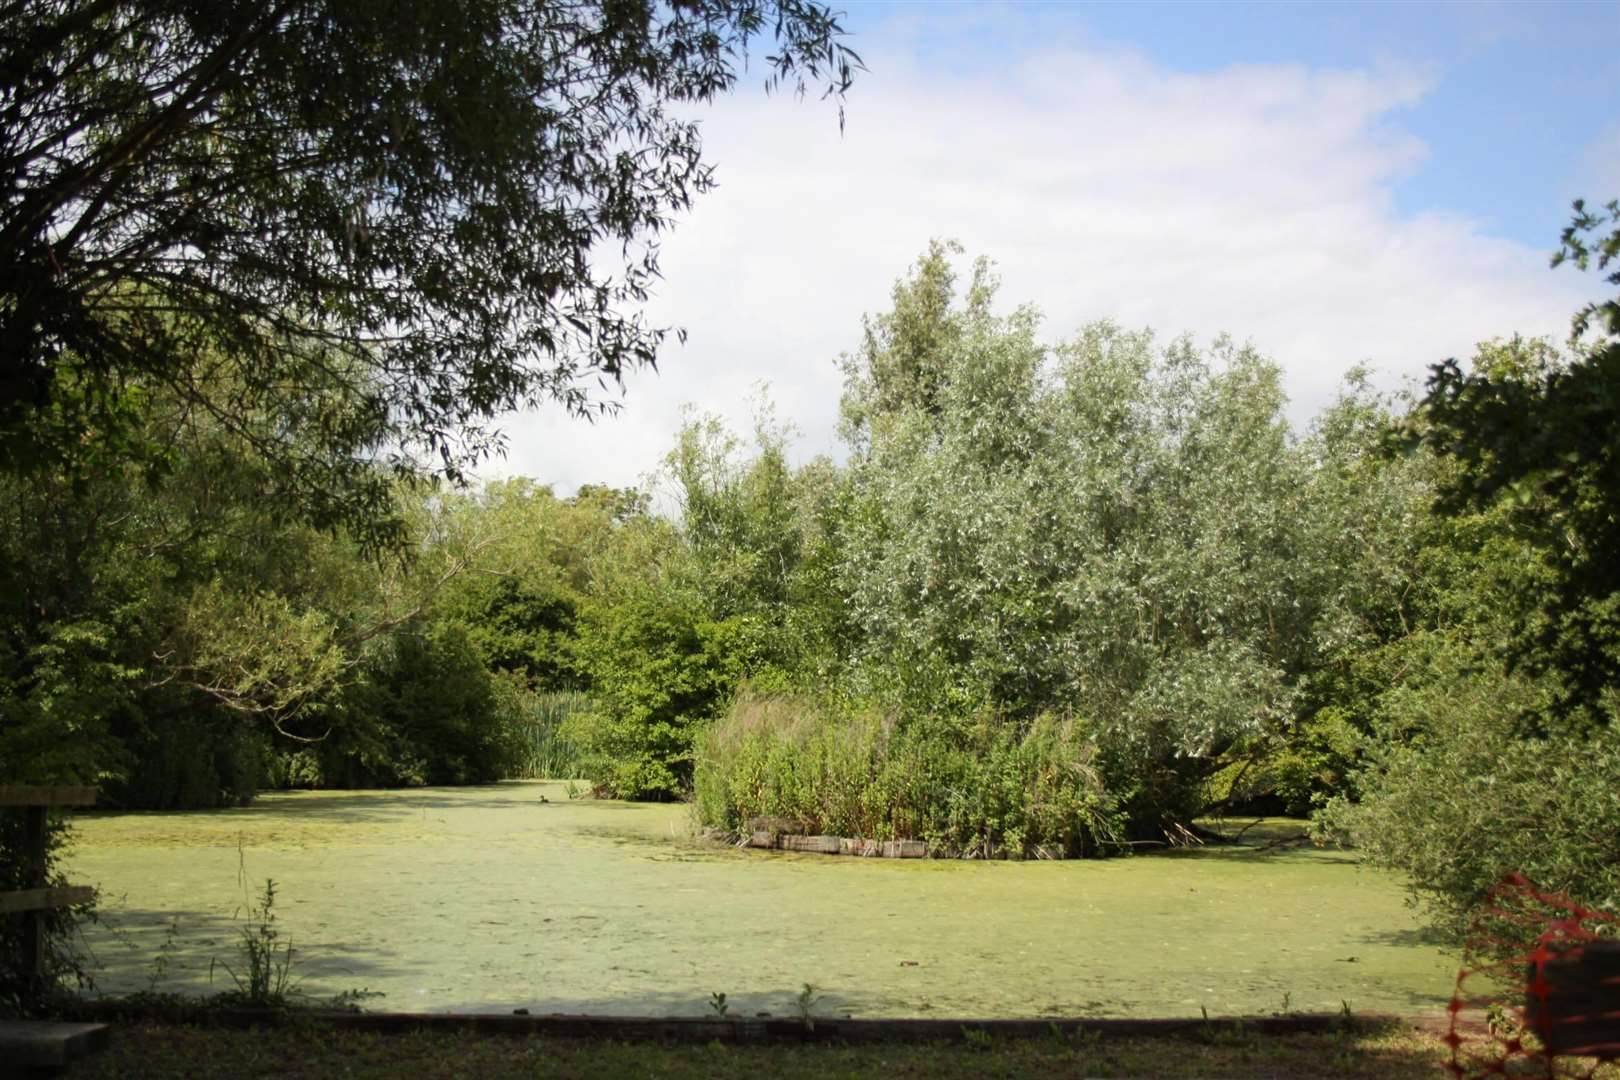 The public can now access the small pond and lake at Gazen Salts Nature Reserve